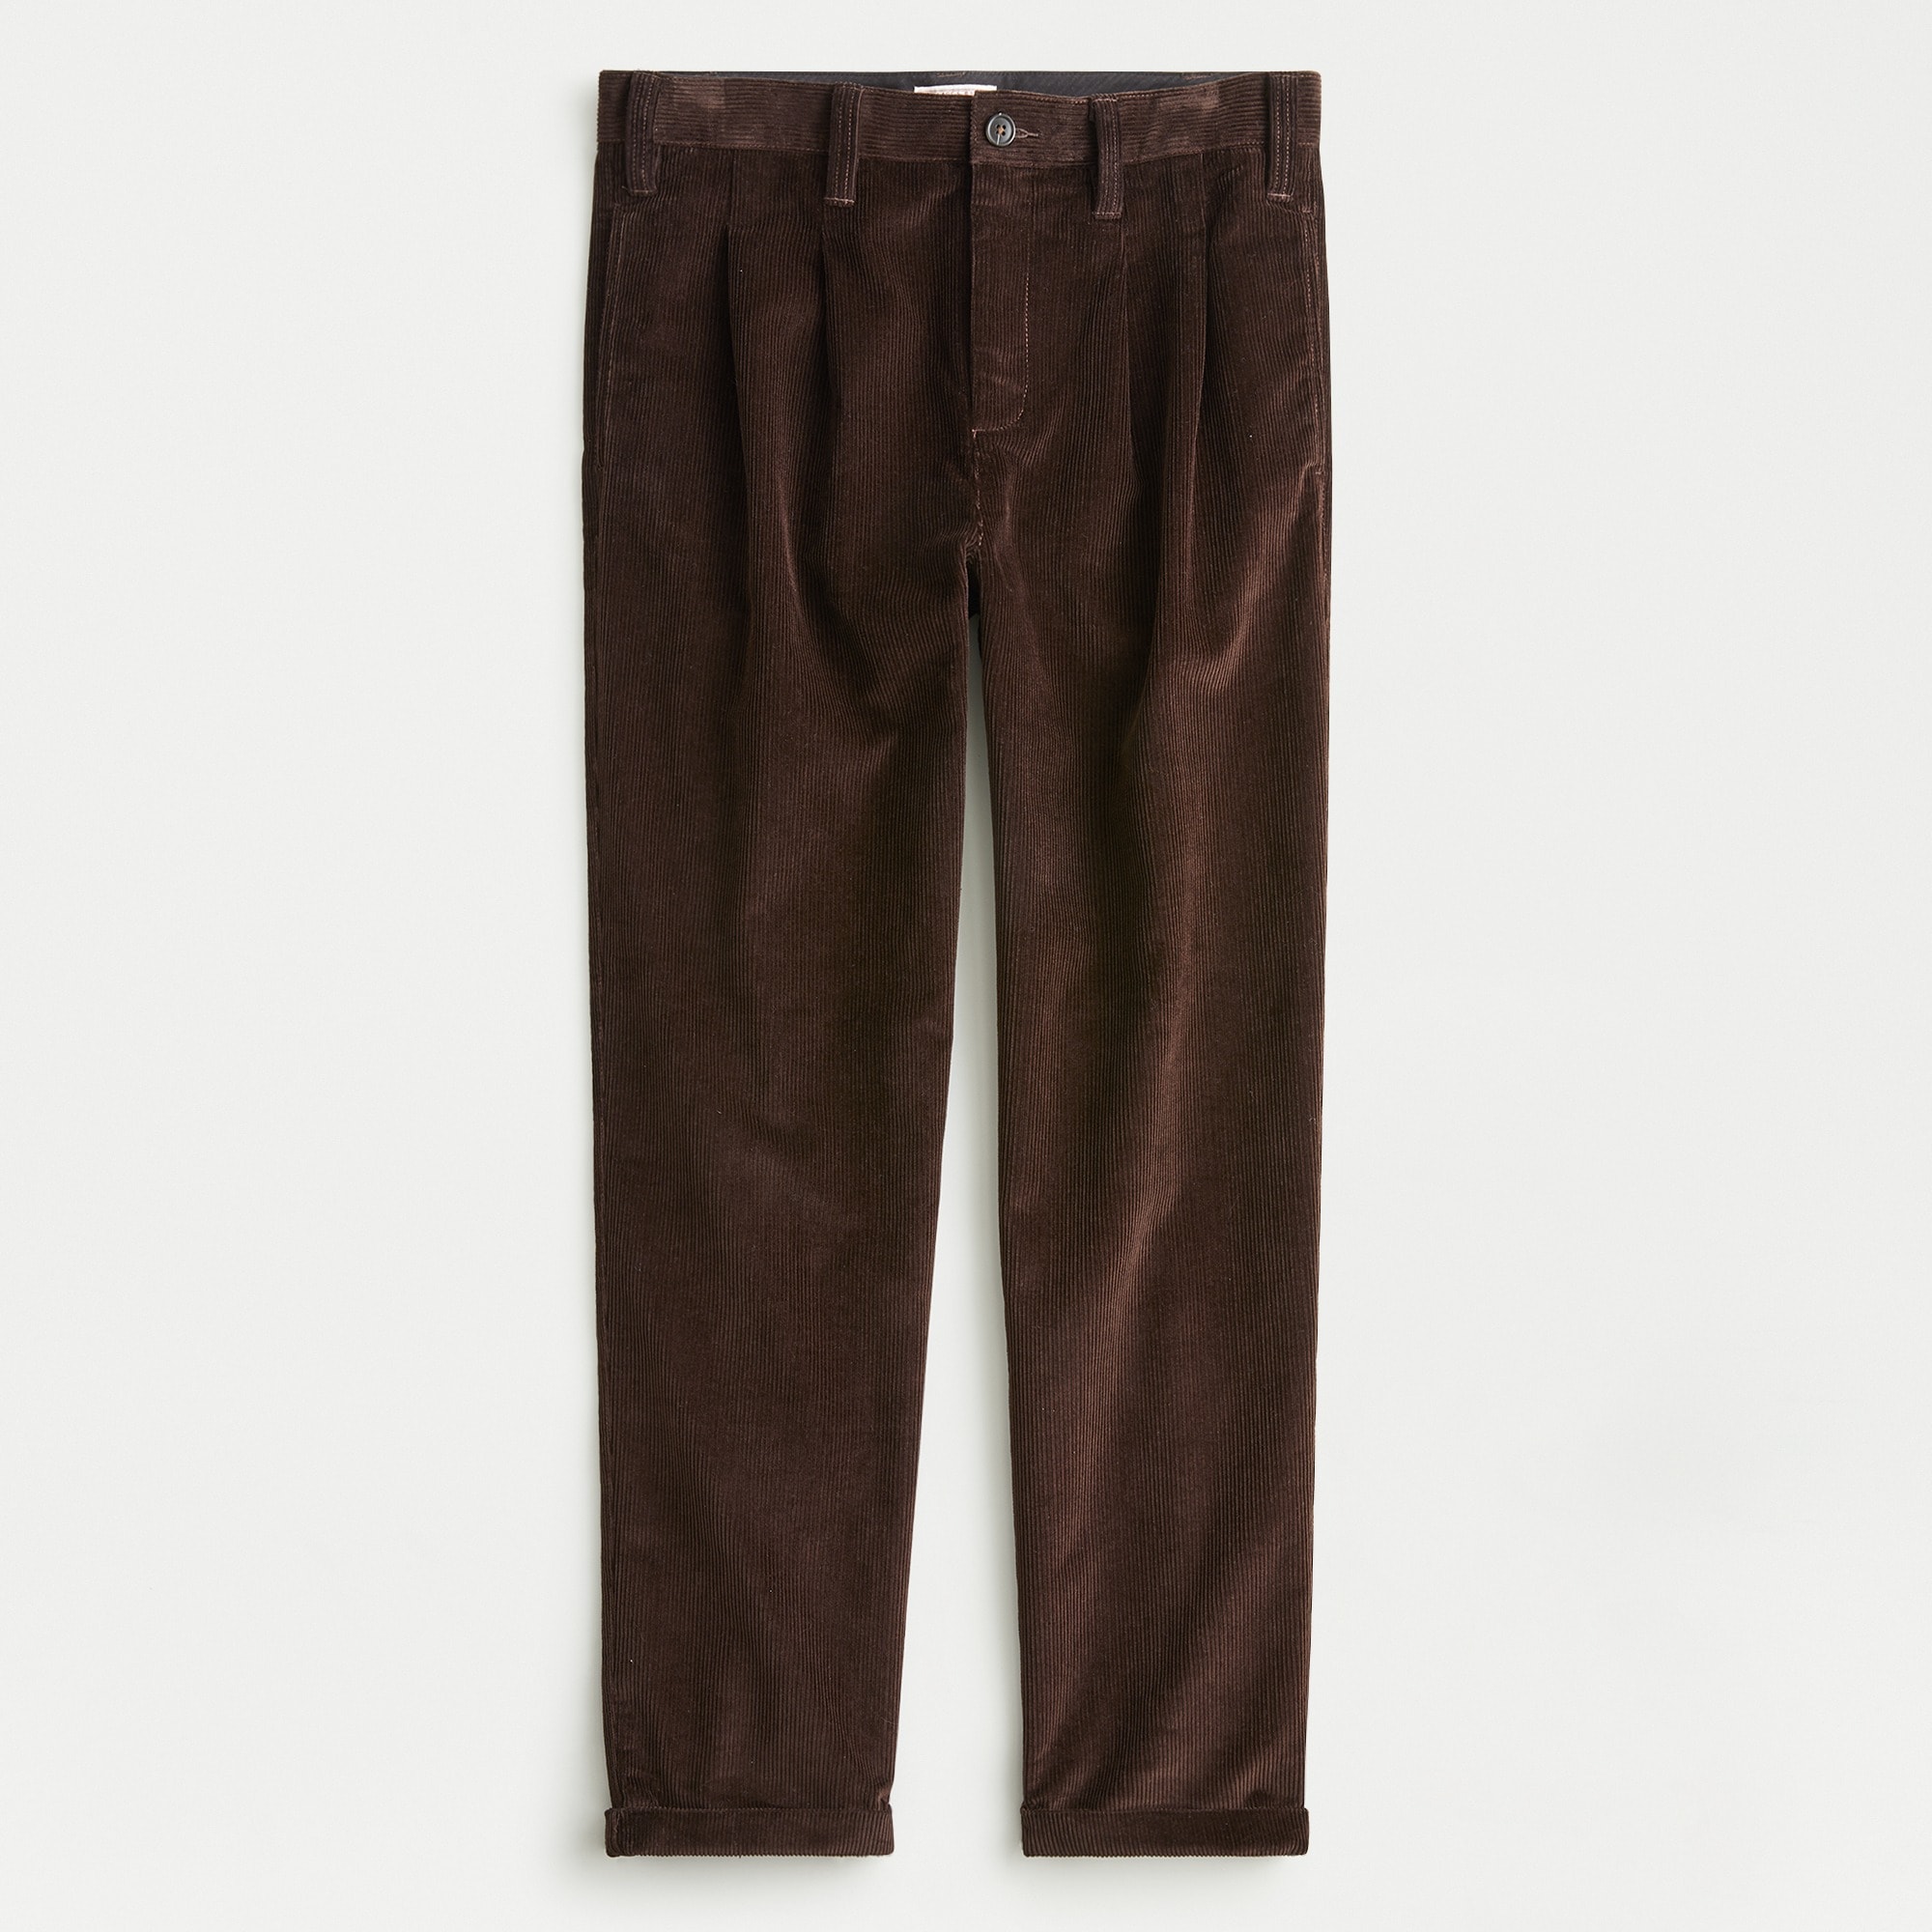 J.Crew: Wallace & Barnes Straight-fit Double-pleated Corduroy Pant